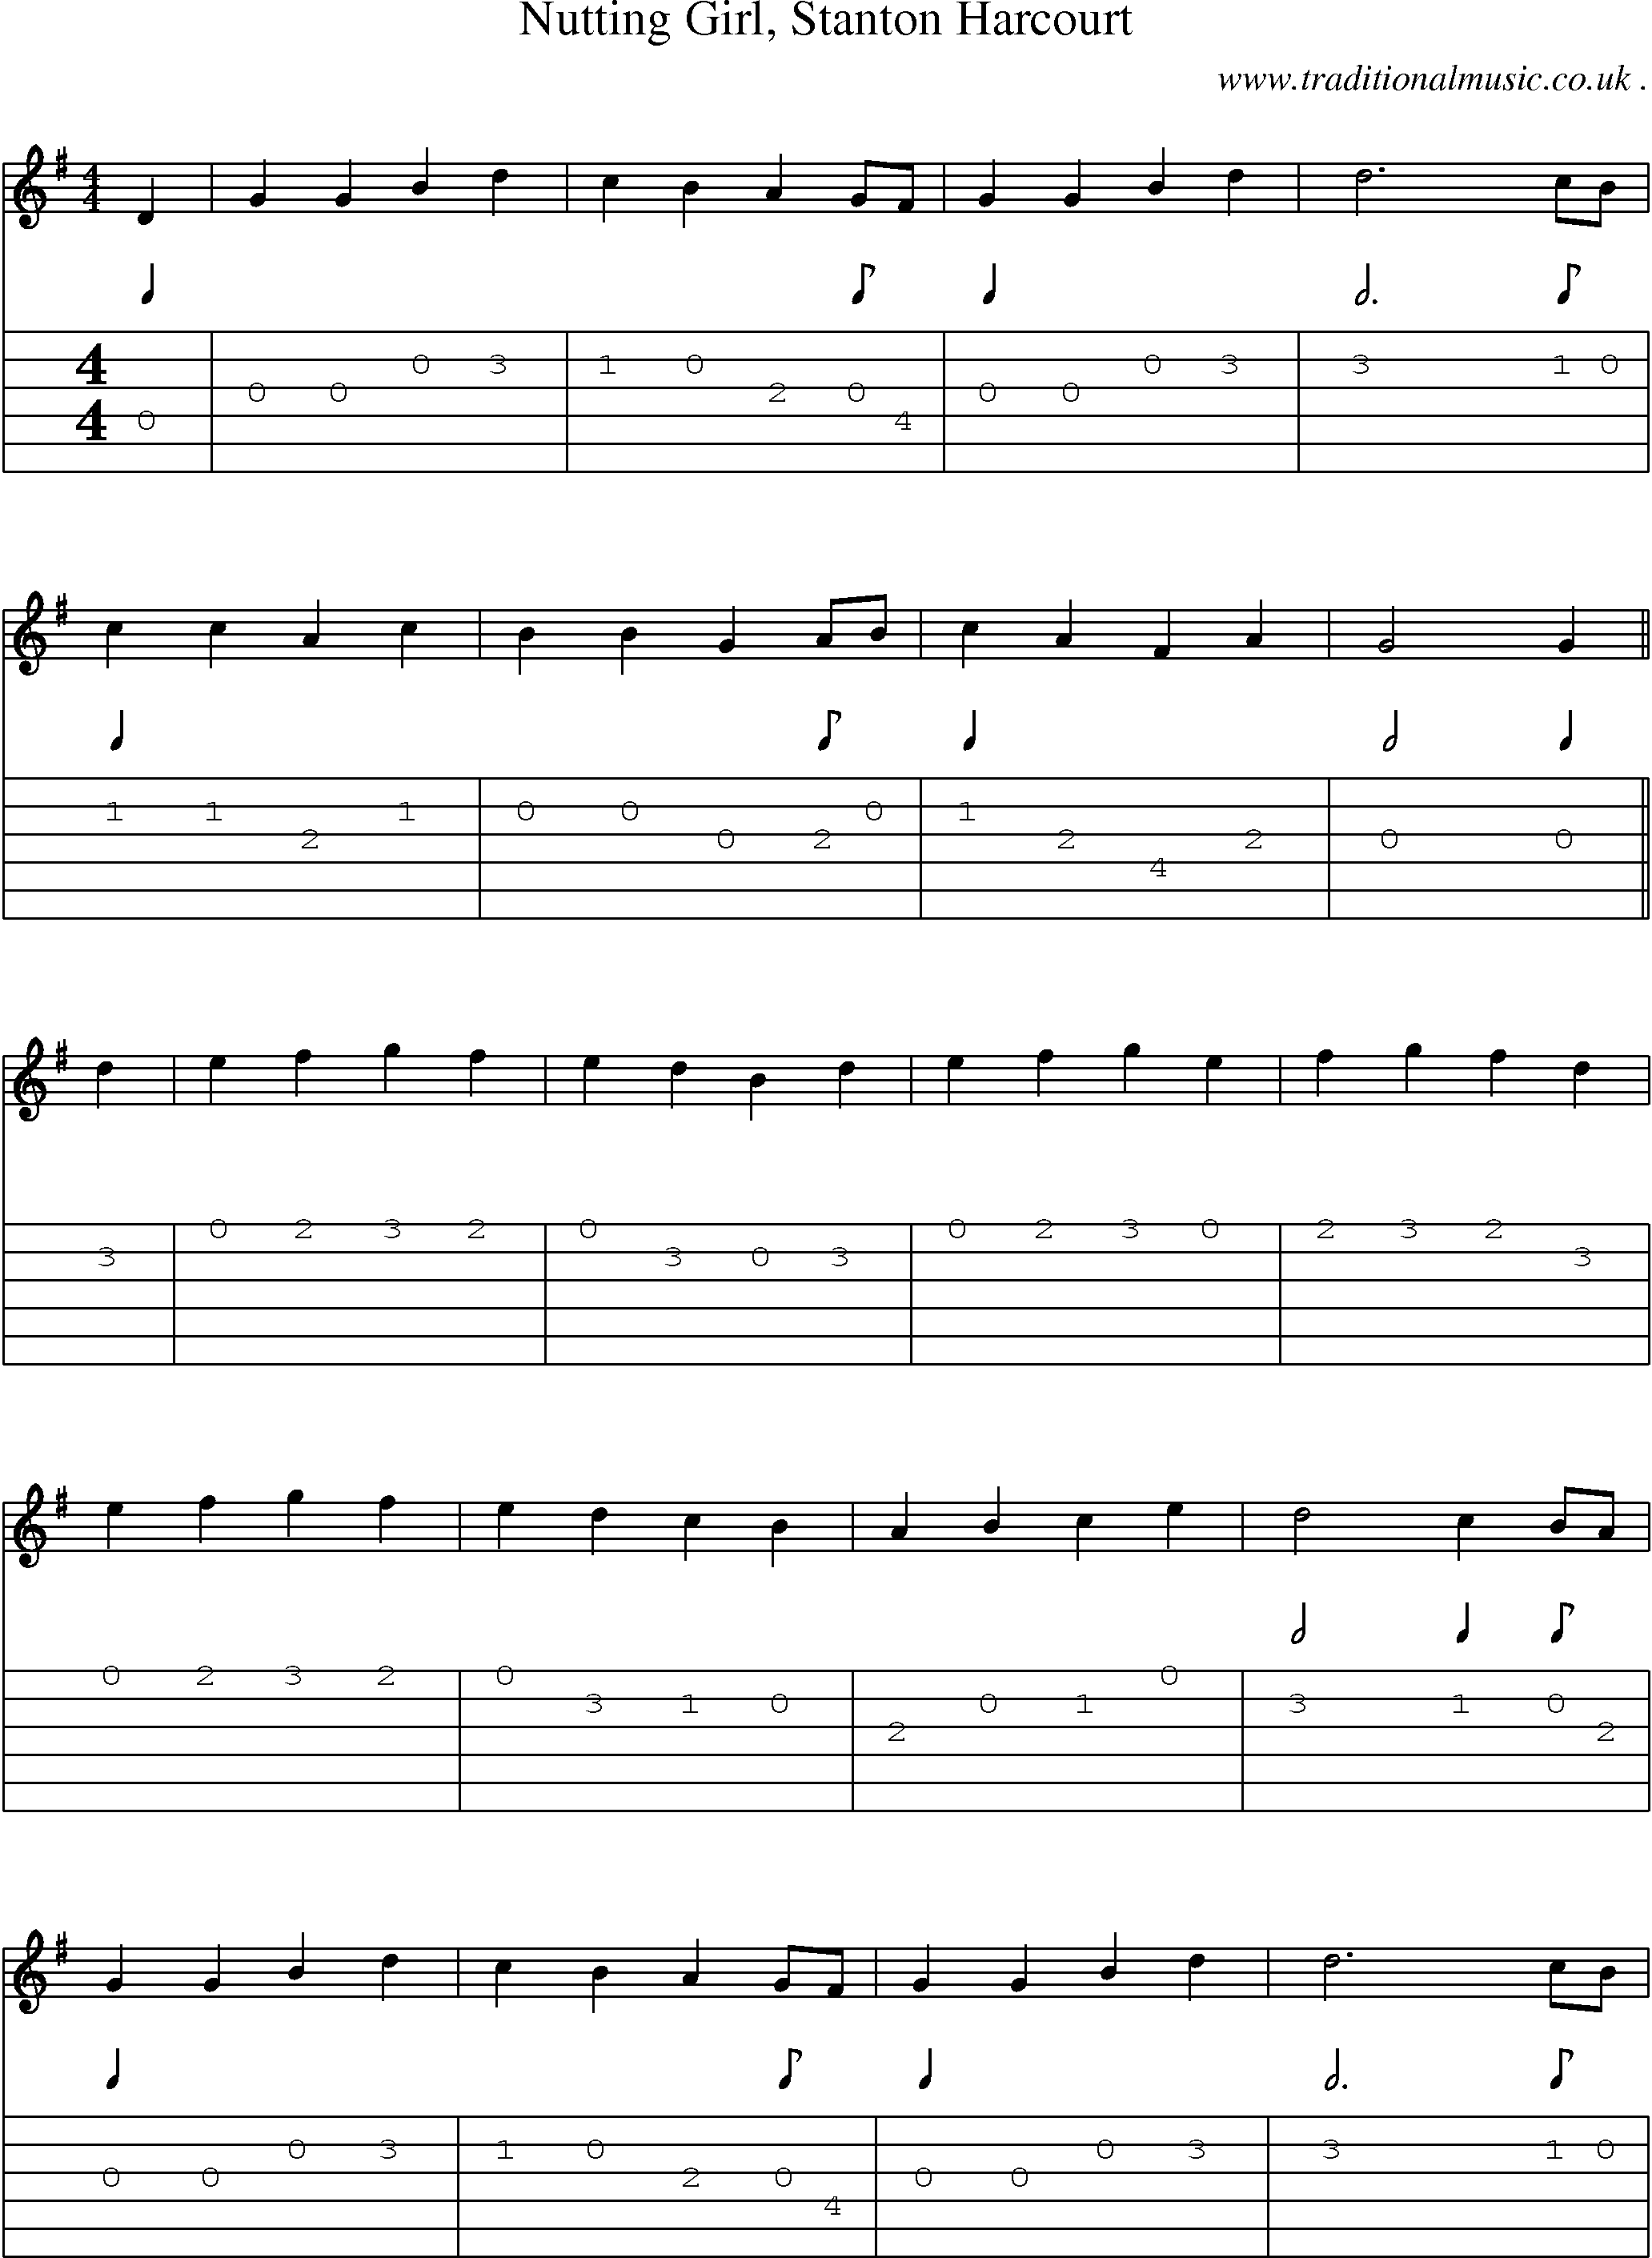 Sheet-Music and Guitar Tabs for Nutting Girl Stanton Harcourt